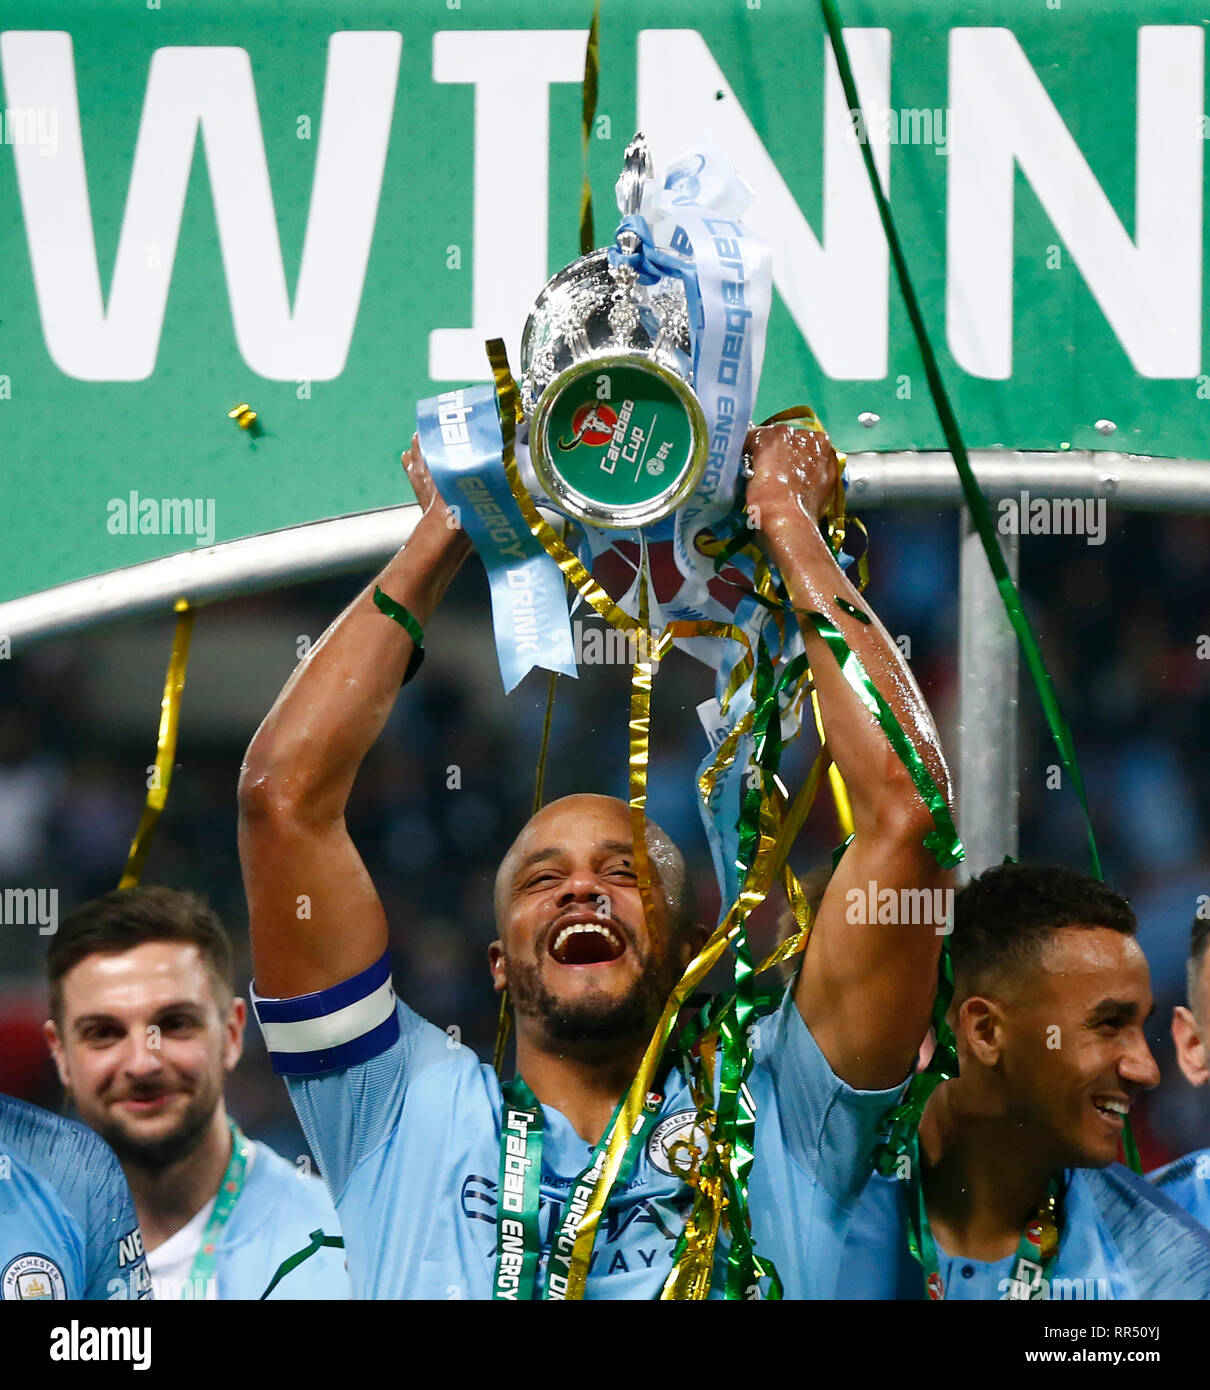 London, England - Febuary 23, 2019 Manchester City's Vincent Kompany with Trophy during during Carabao Cup Final between Chelsea and Manchester City at Wembley stadium , London, England on 23 Feb 2019 Credit Action Foto Sport  FA Premier League and Football League images are subject to DataCo Licence. Editorial use ONLY. No print sales. No personal use sales. NO UNPAID USE Stock Photo